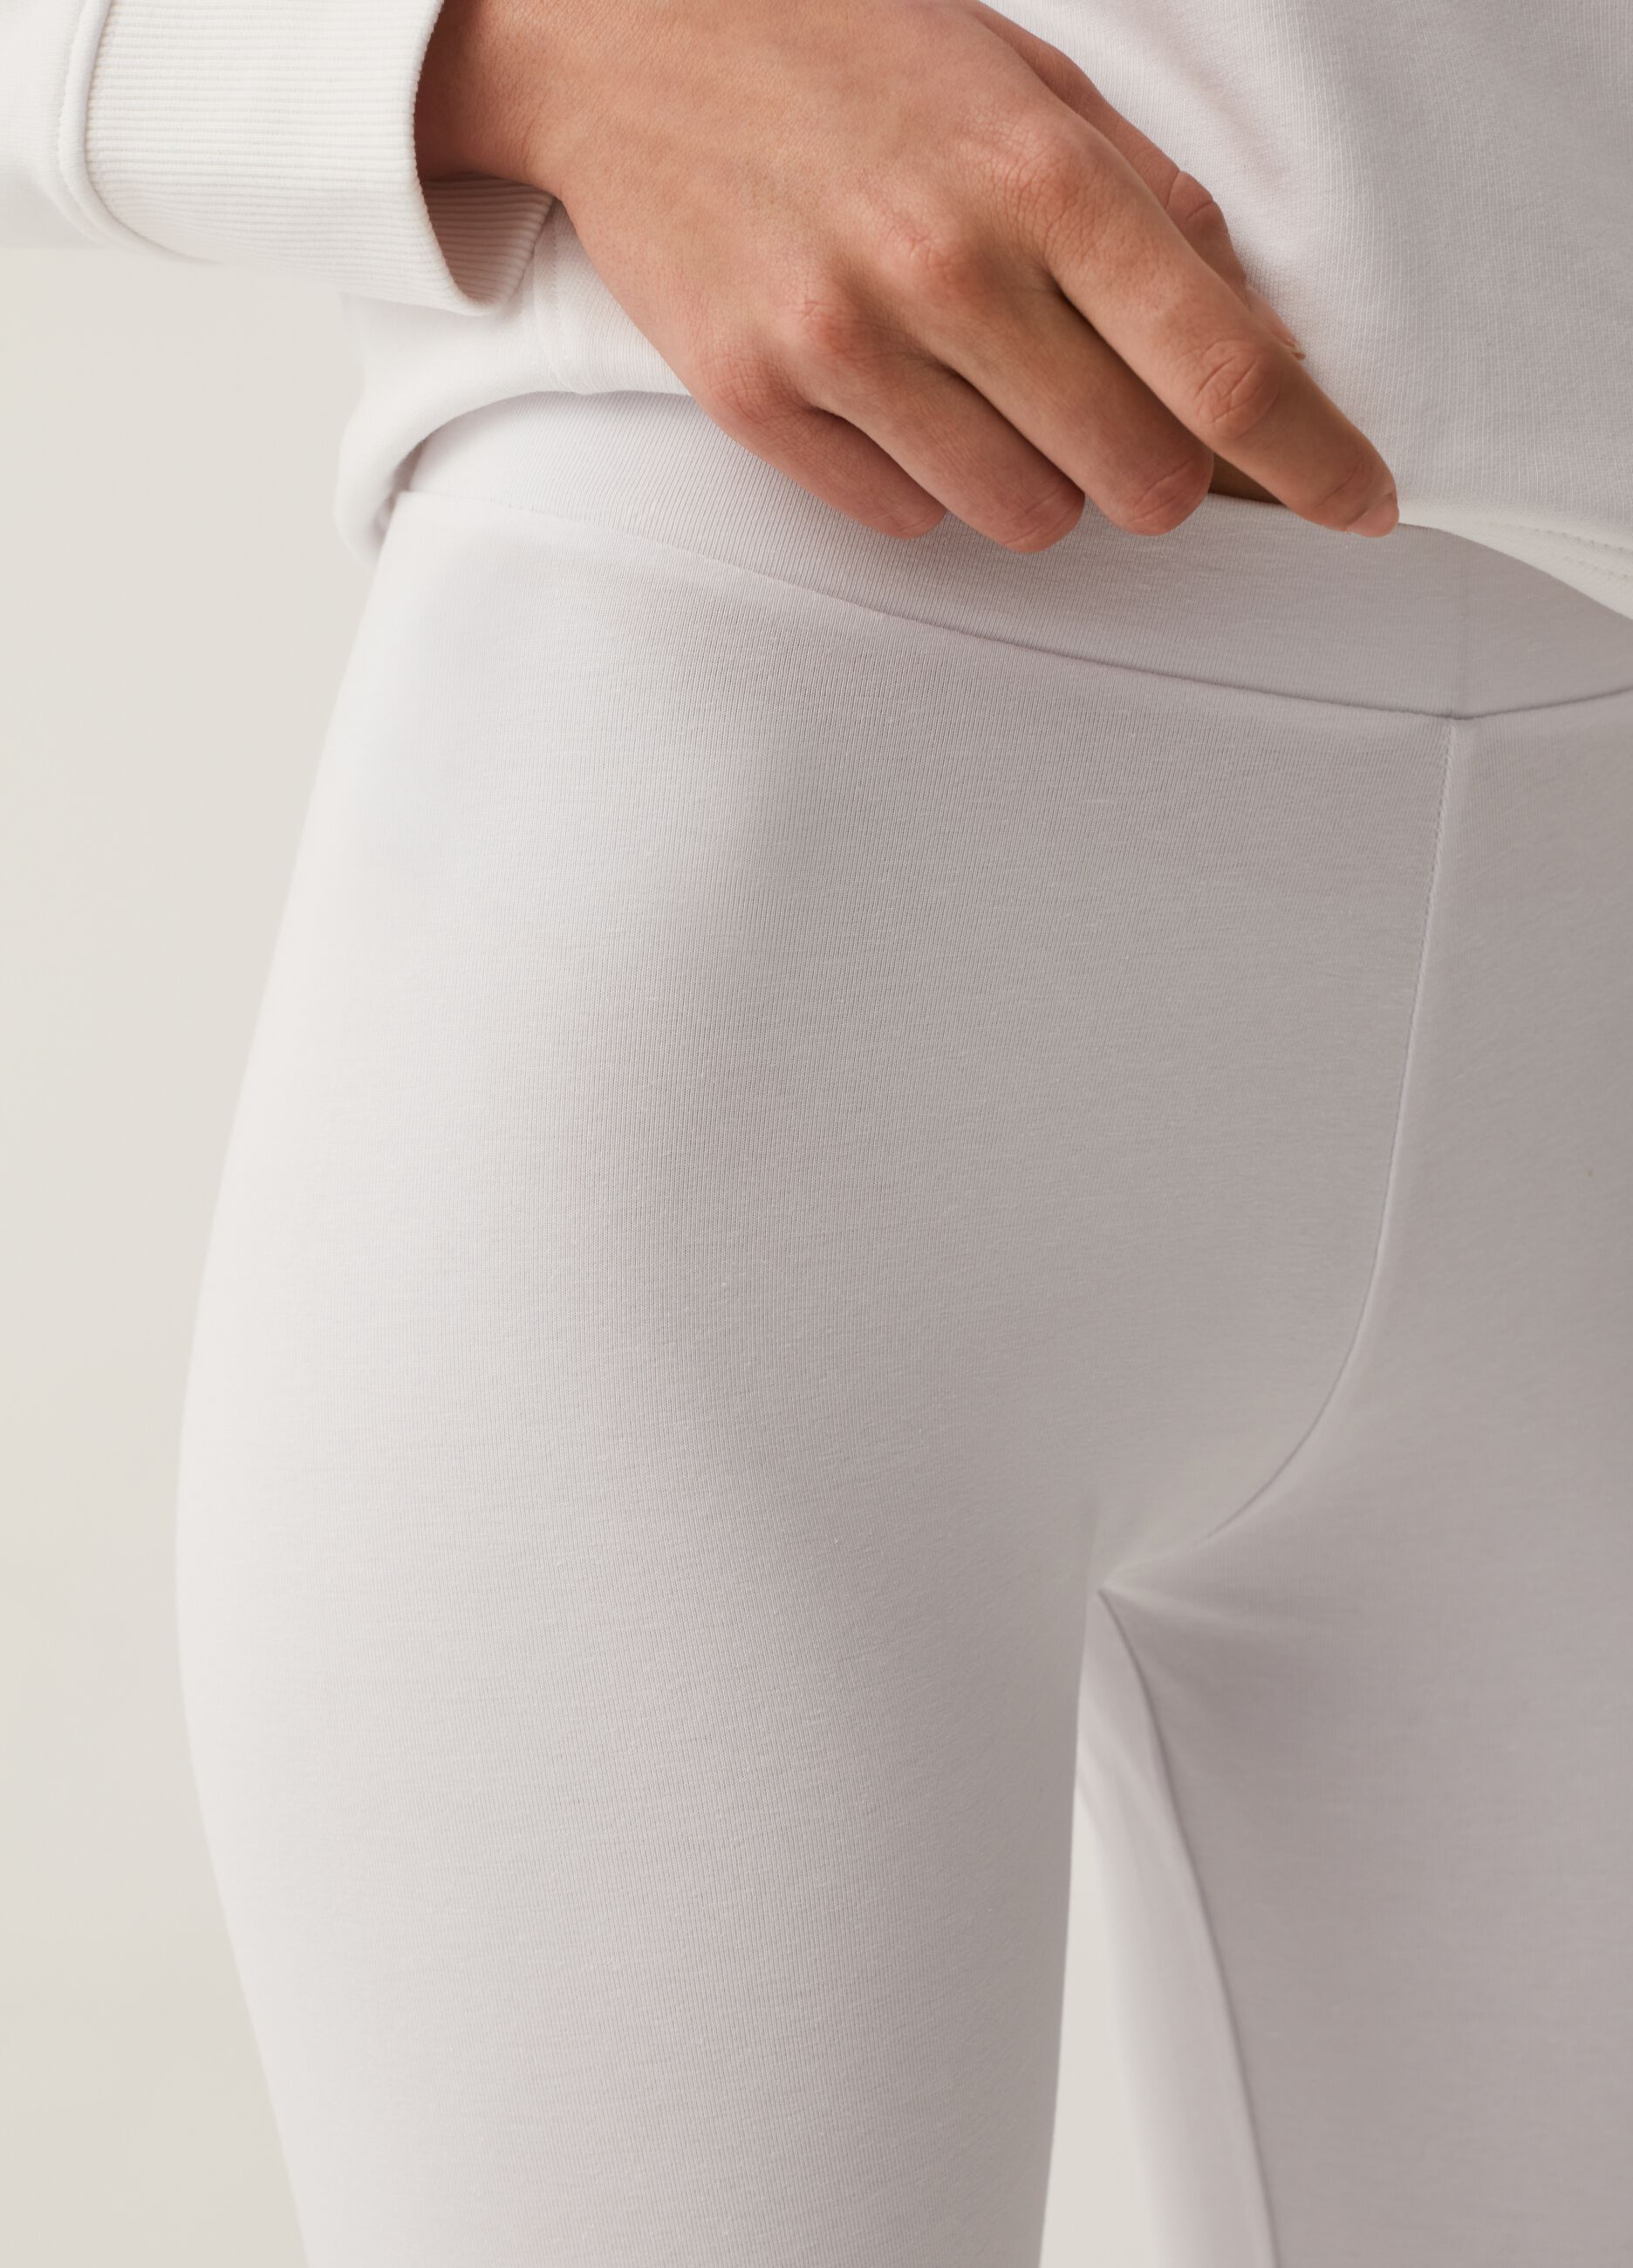 Fitness crop leggings in stretch cotton